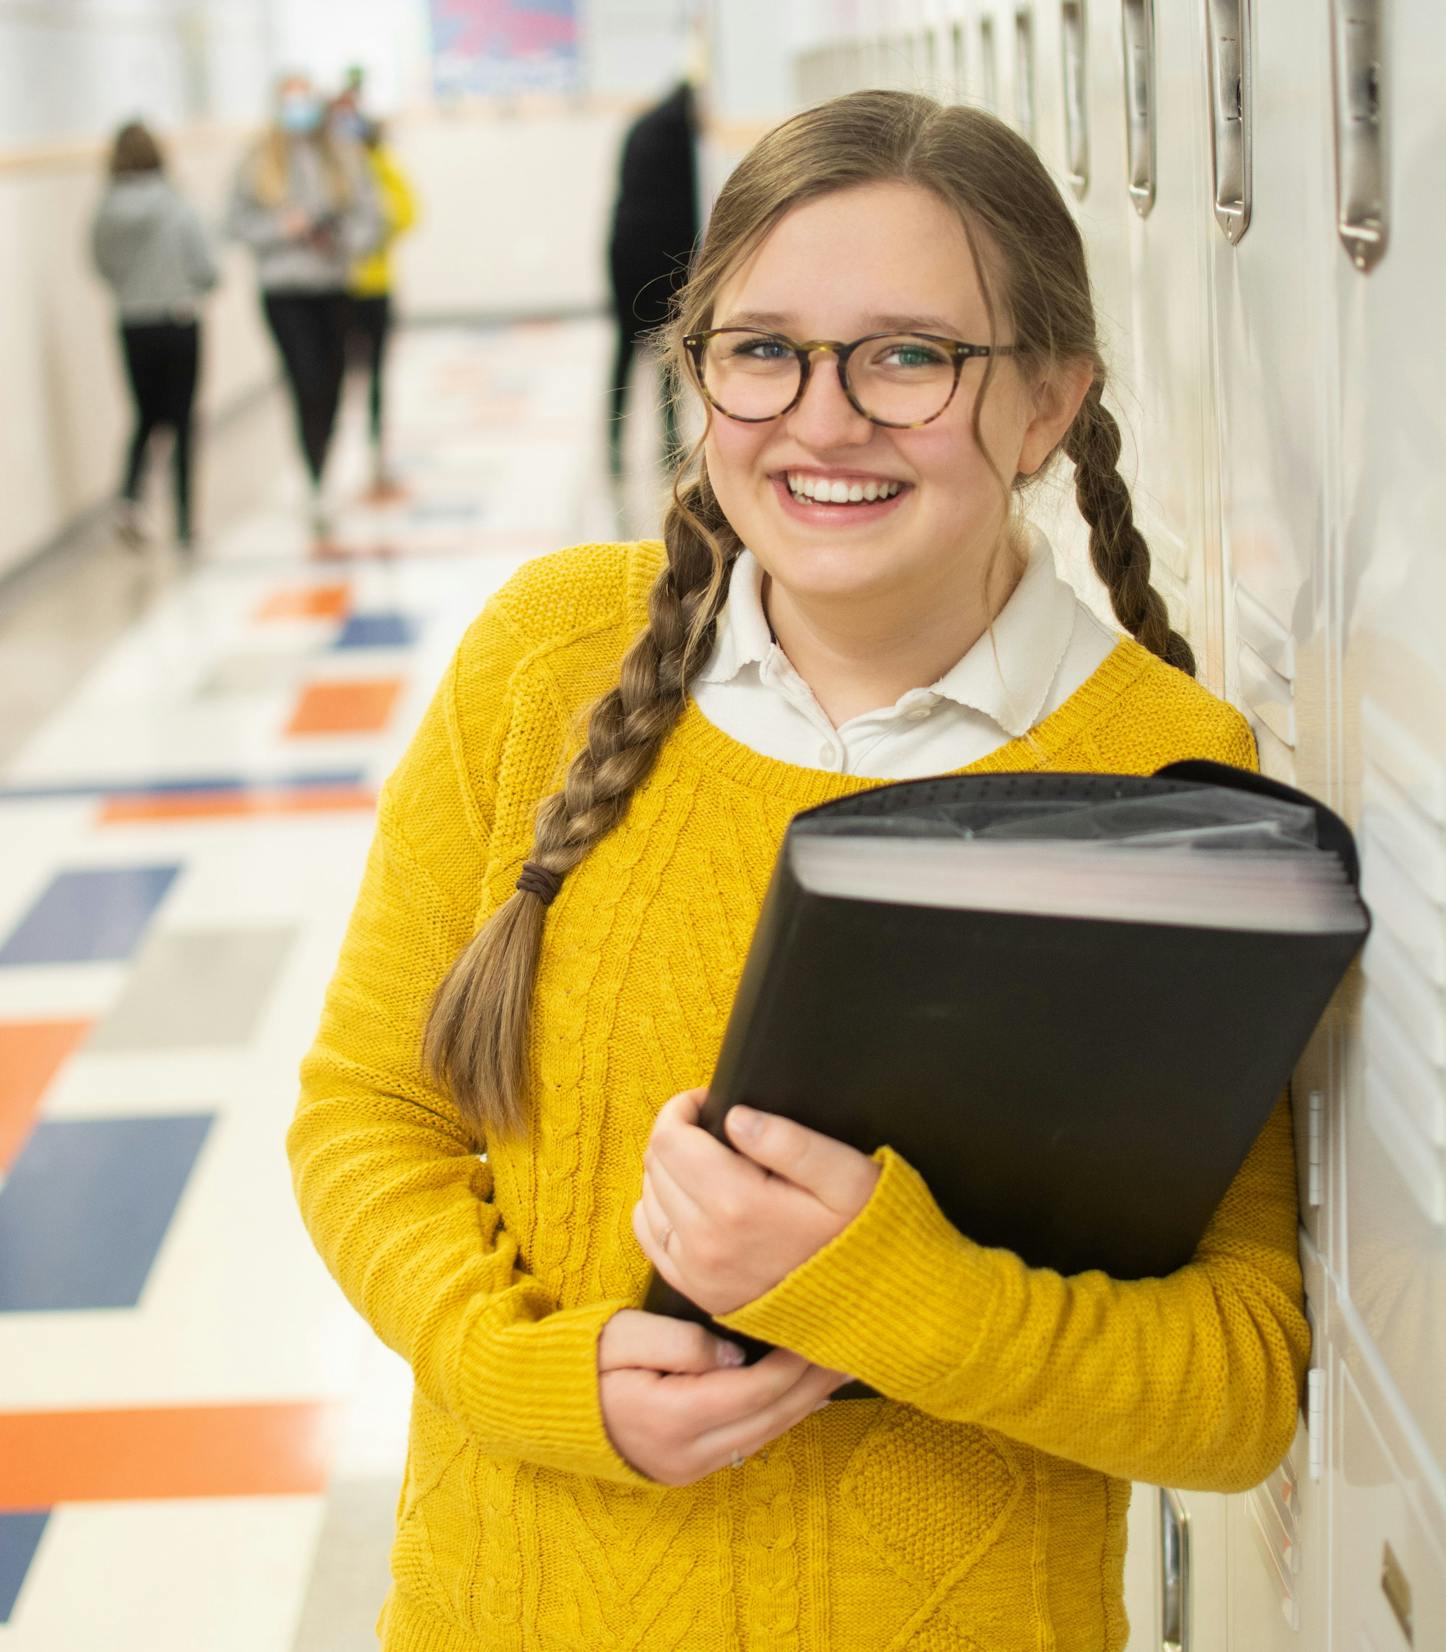 Female student smiling and standing against locker with work book.